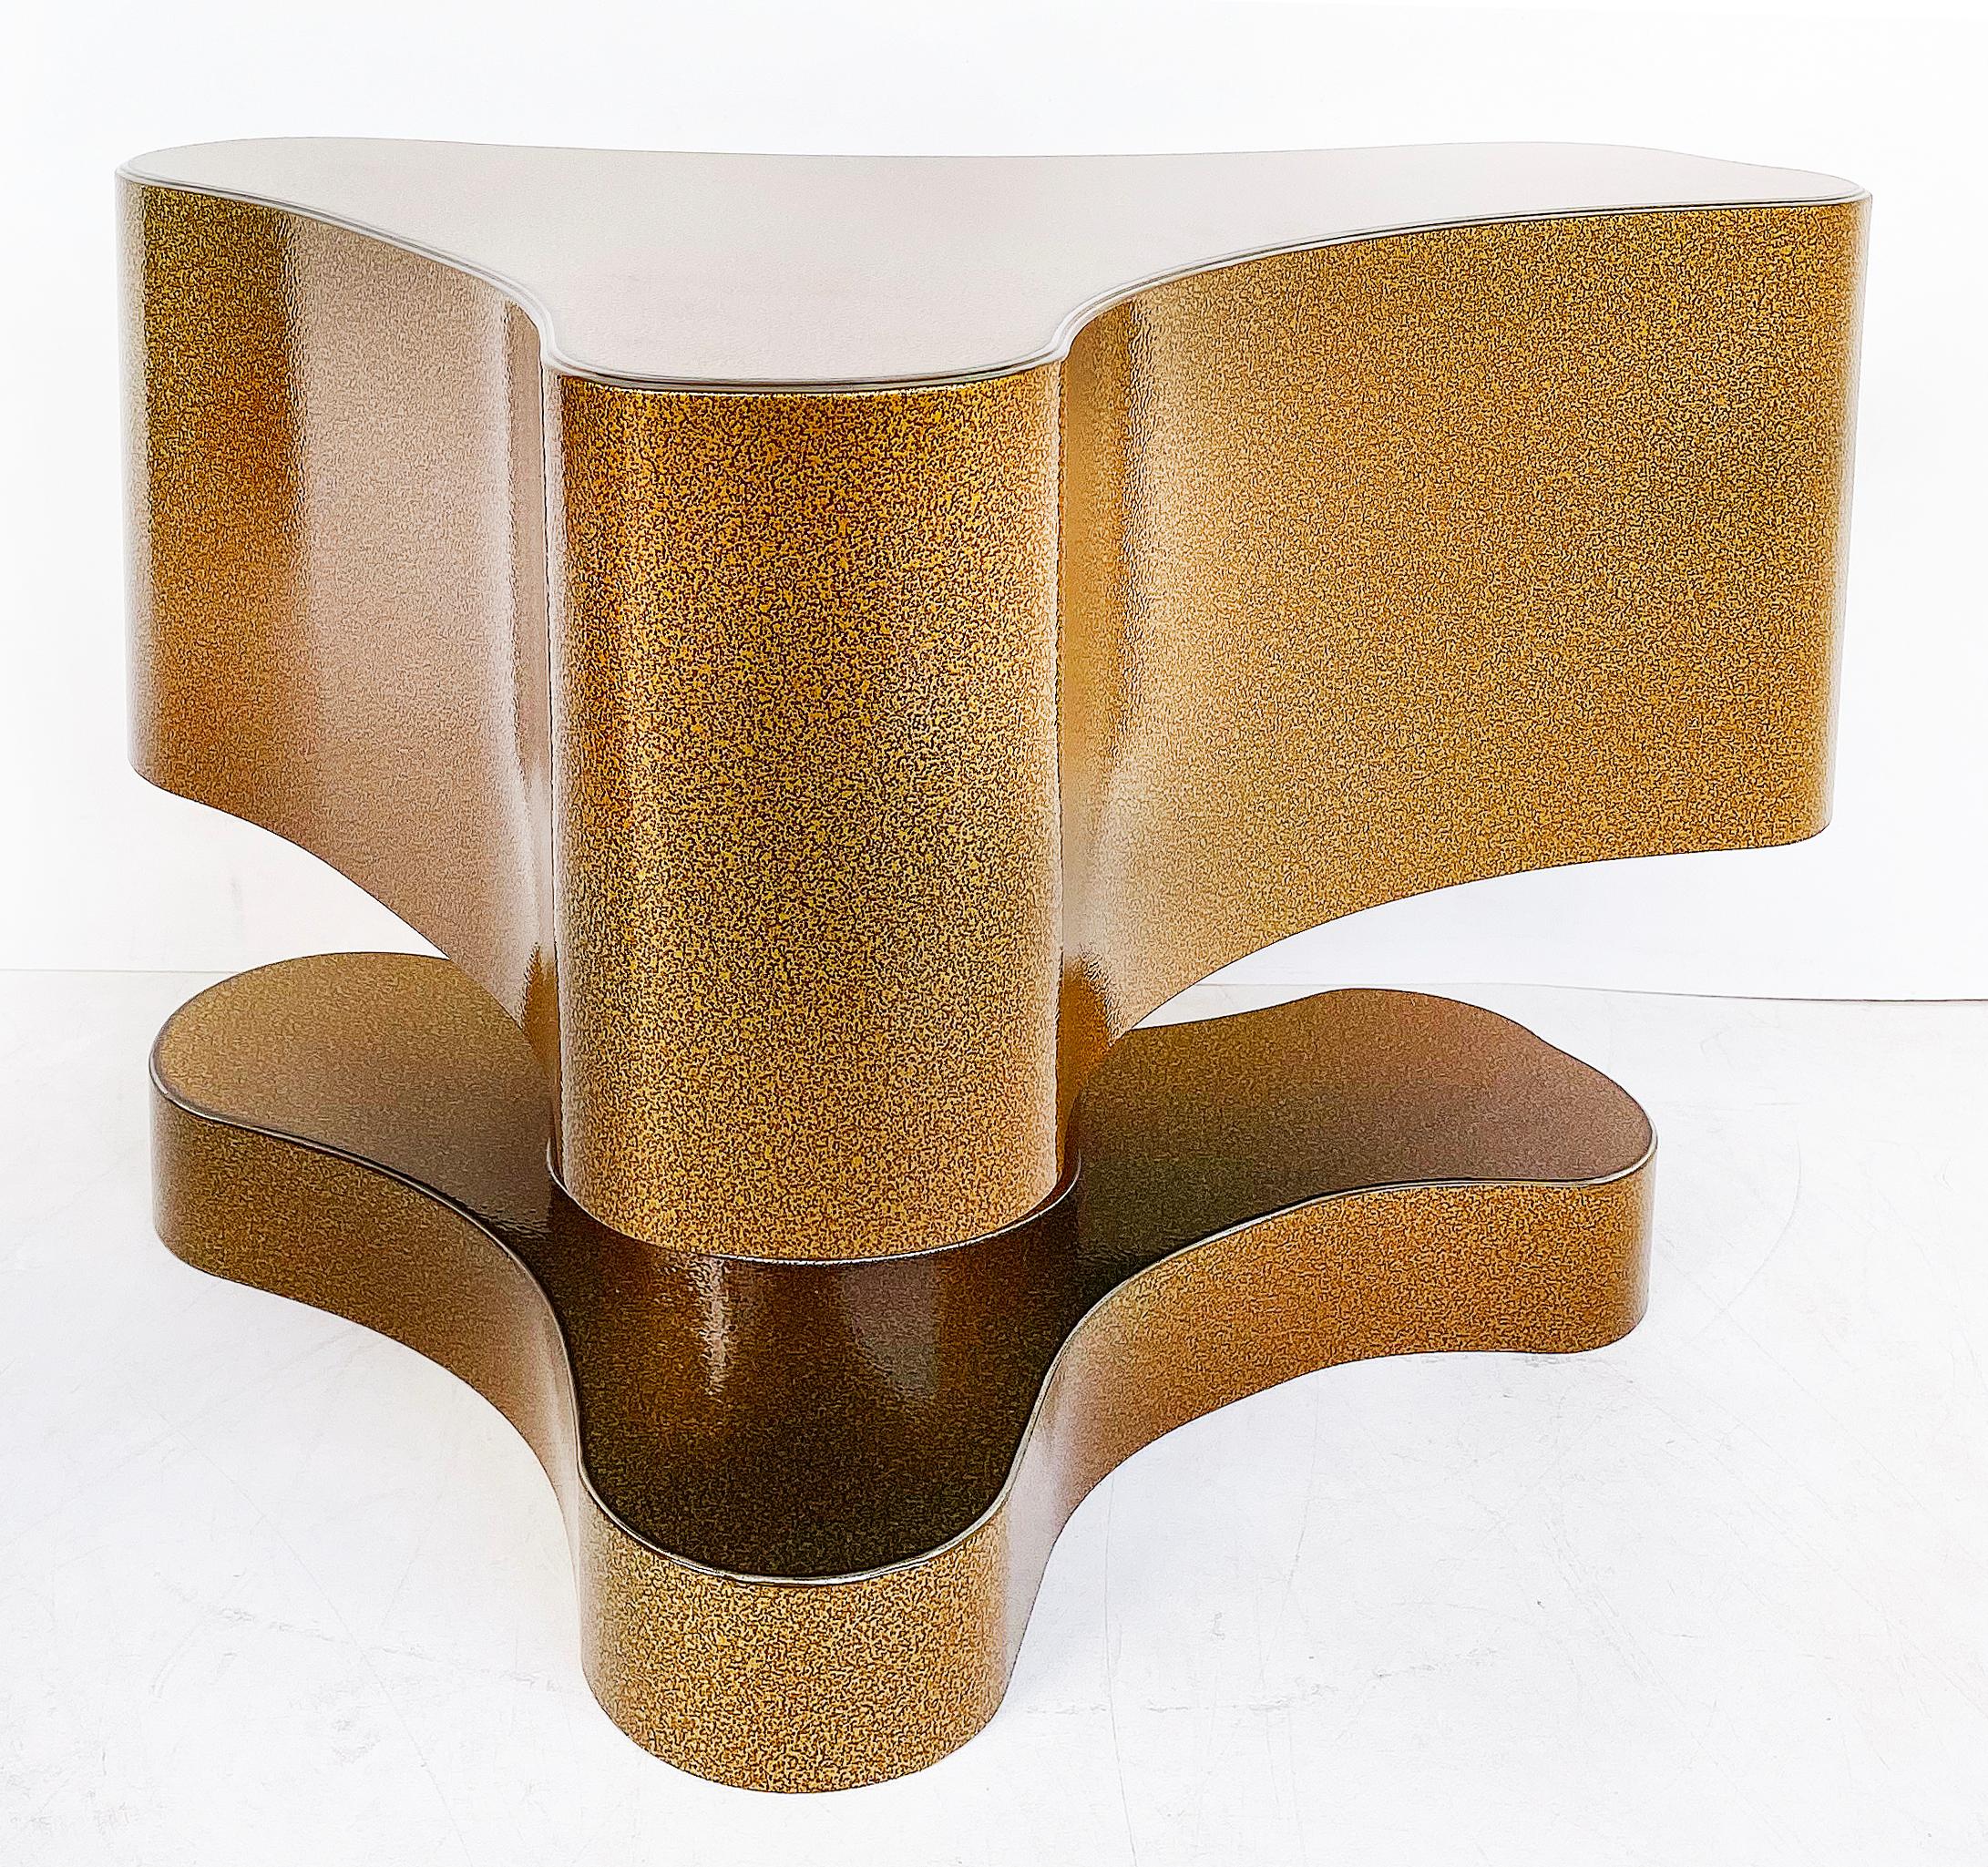 Contemporary Bert Furnari Studio Free-Form Abstract Side Tables in Powder-Coated Aluminum For Sale